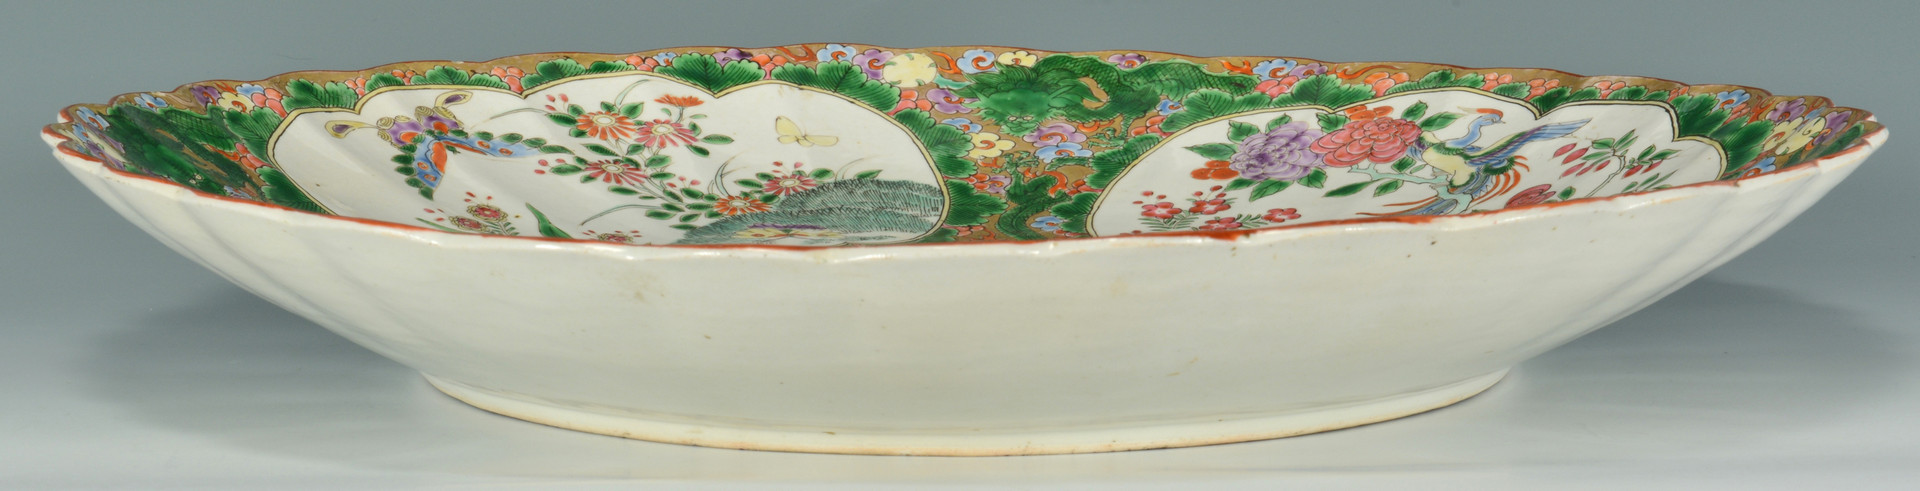 Lot 808: Large Chinese Famille Verte Porcelain Charger